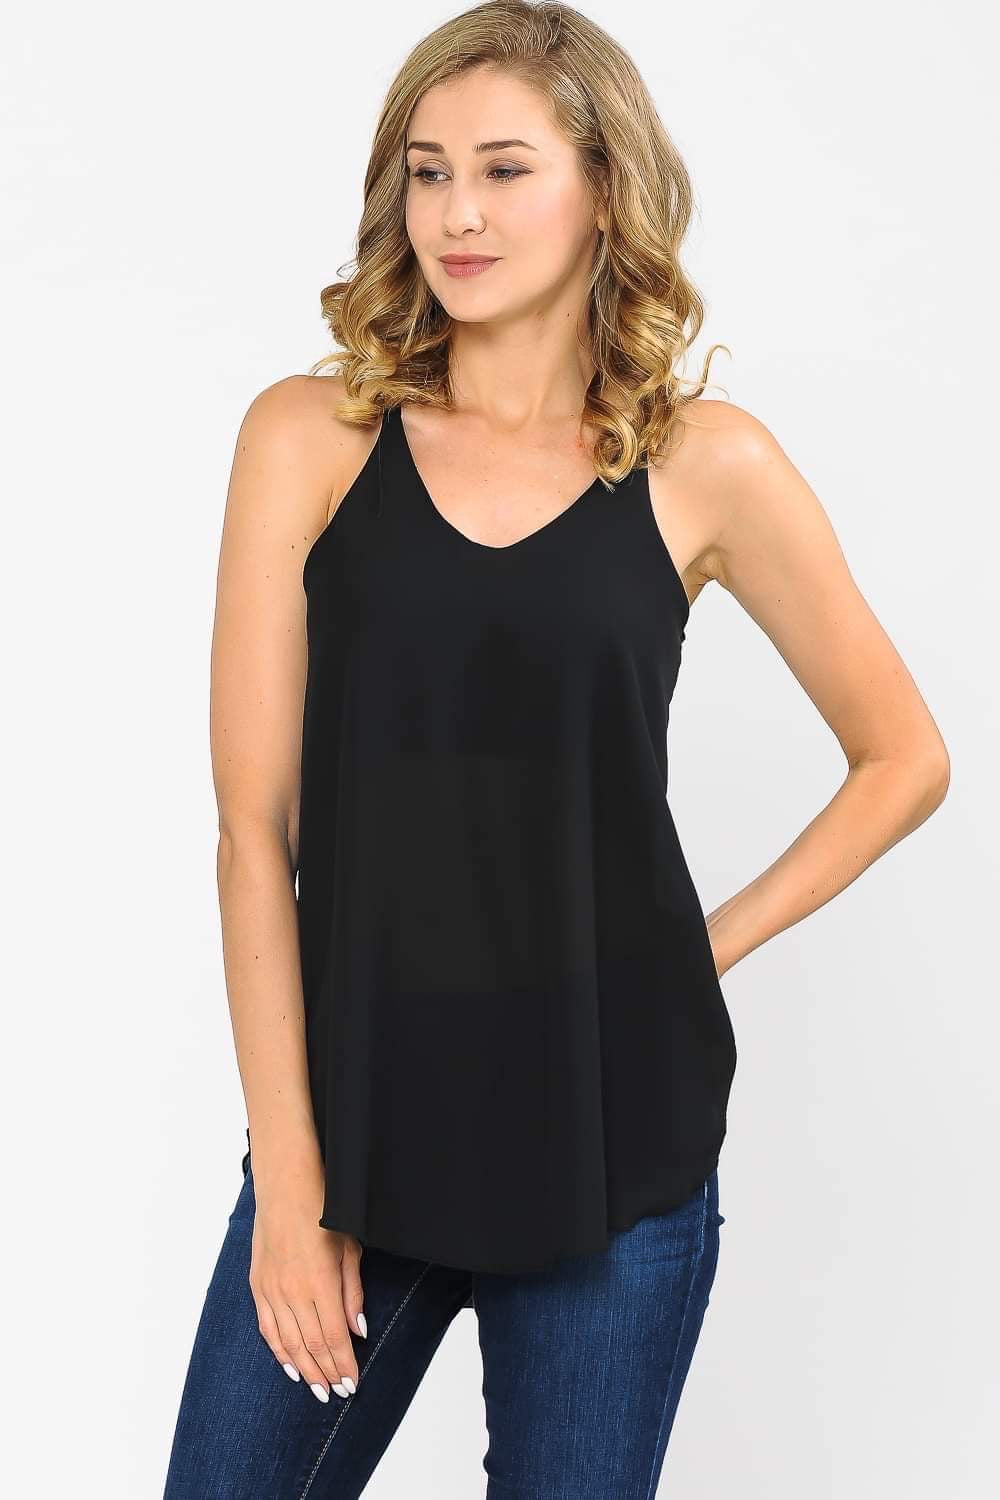 SOLID COLOR V-NECK SLEEVELESS BLOUSE - Lil Monkey Boutique